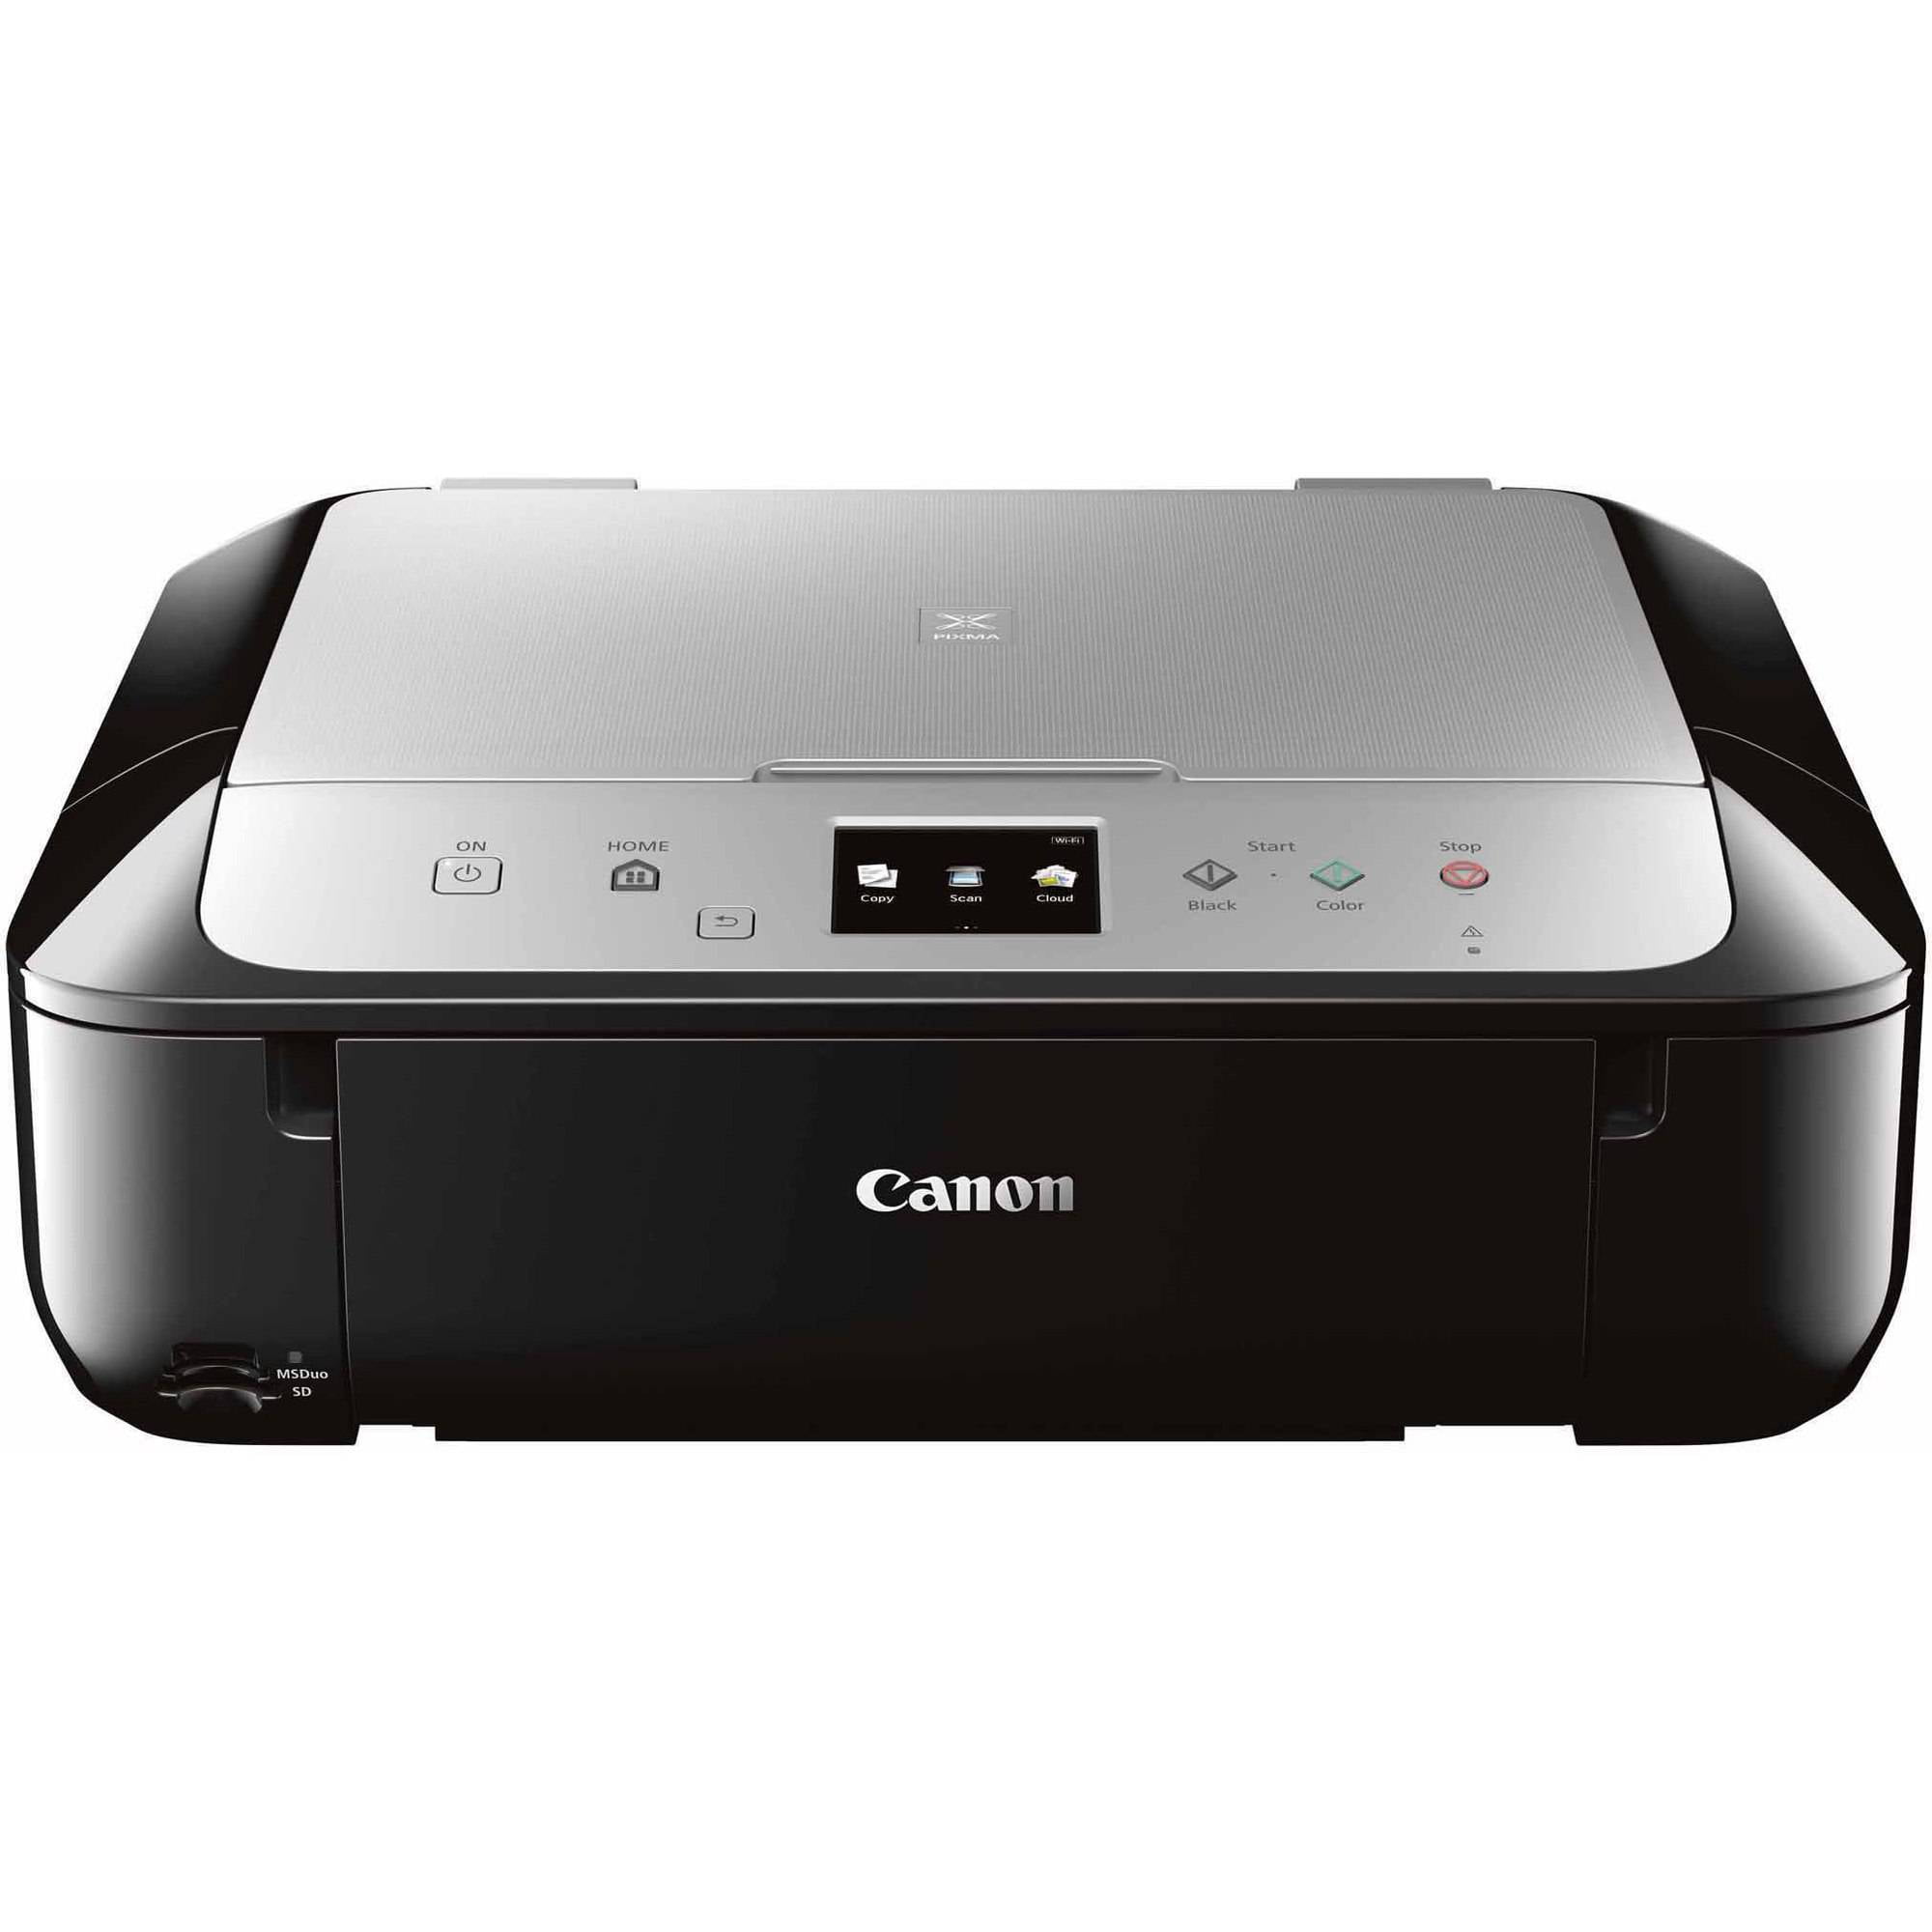 CANON PIXMA MG6220 SCANNER DRIVER DOWNLOAD